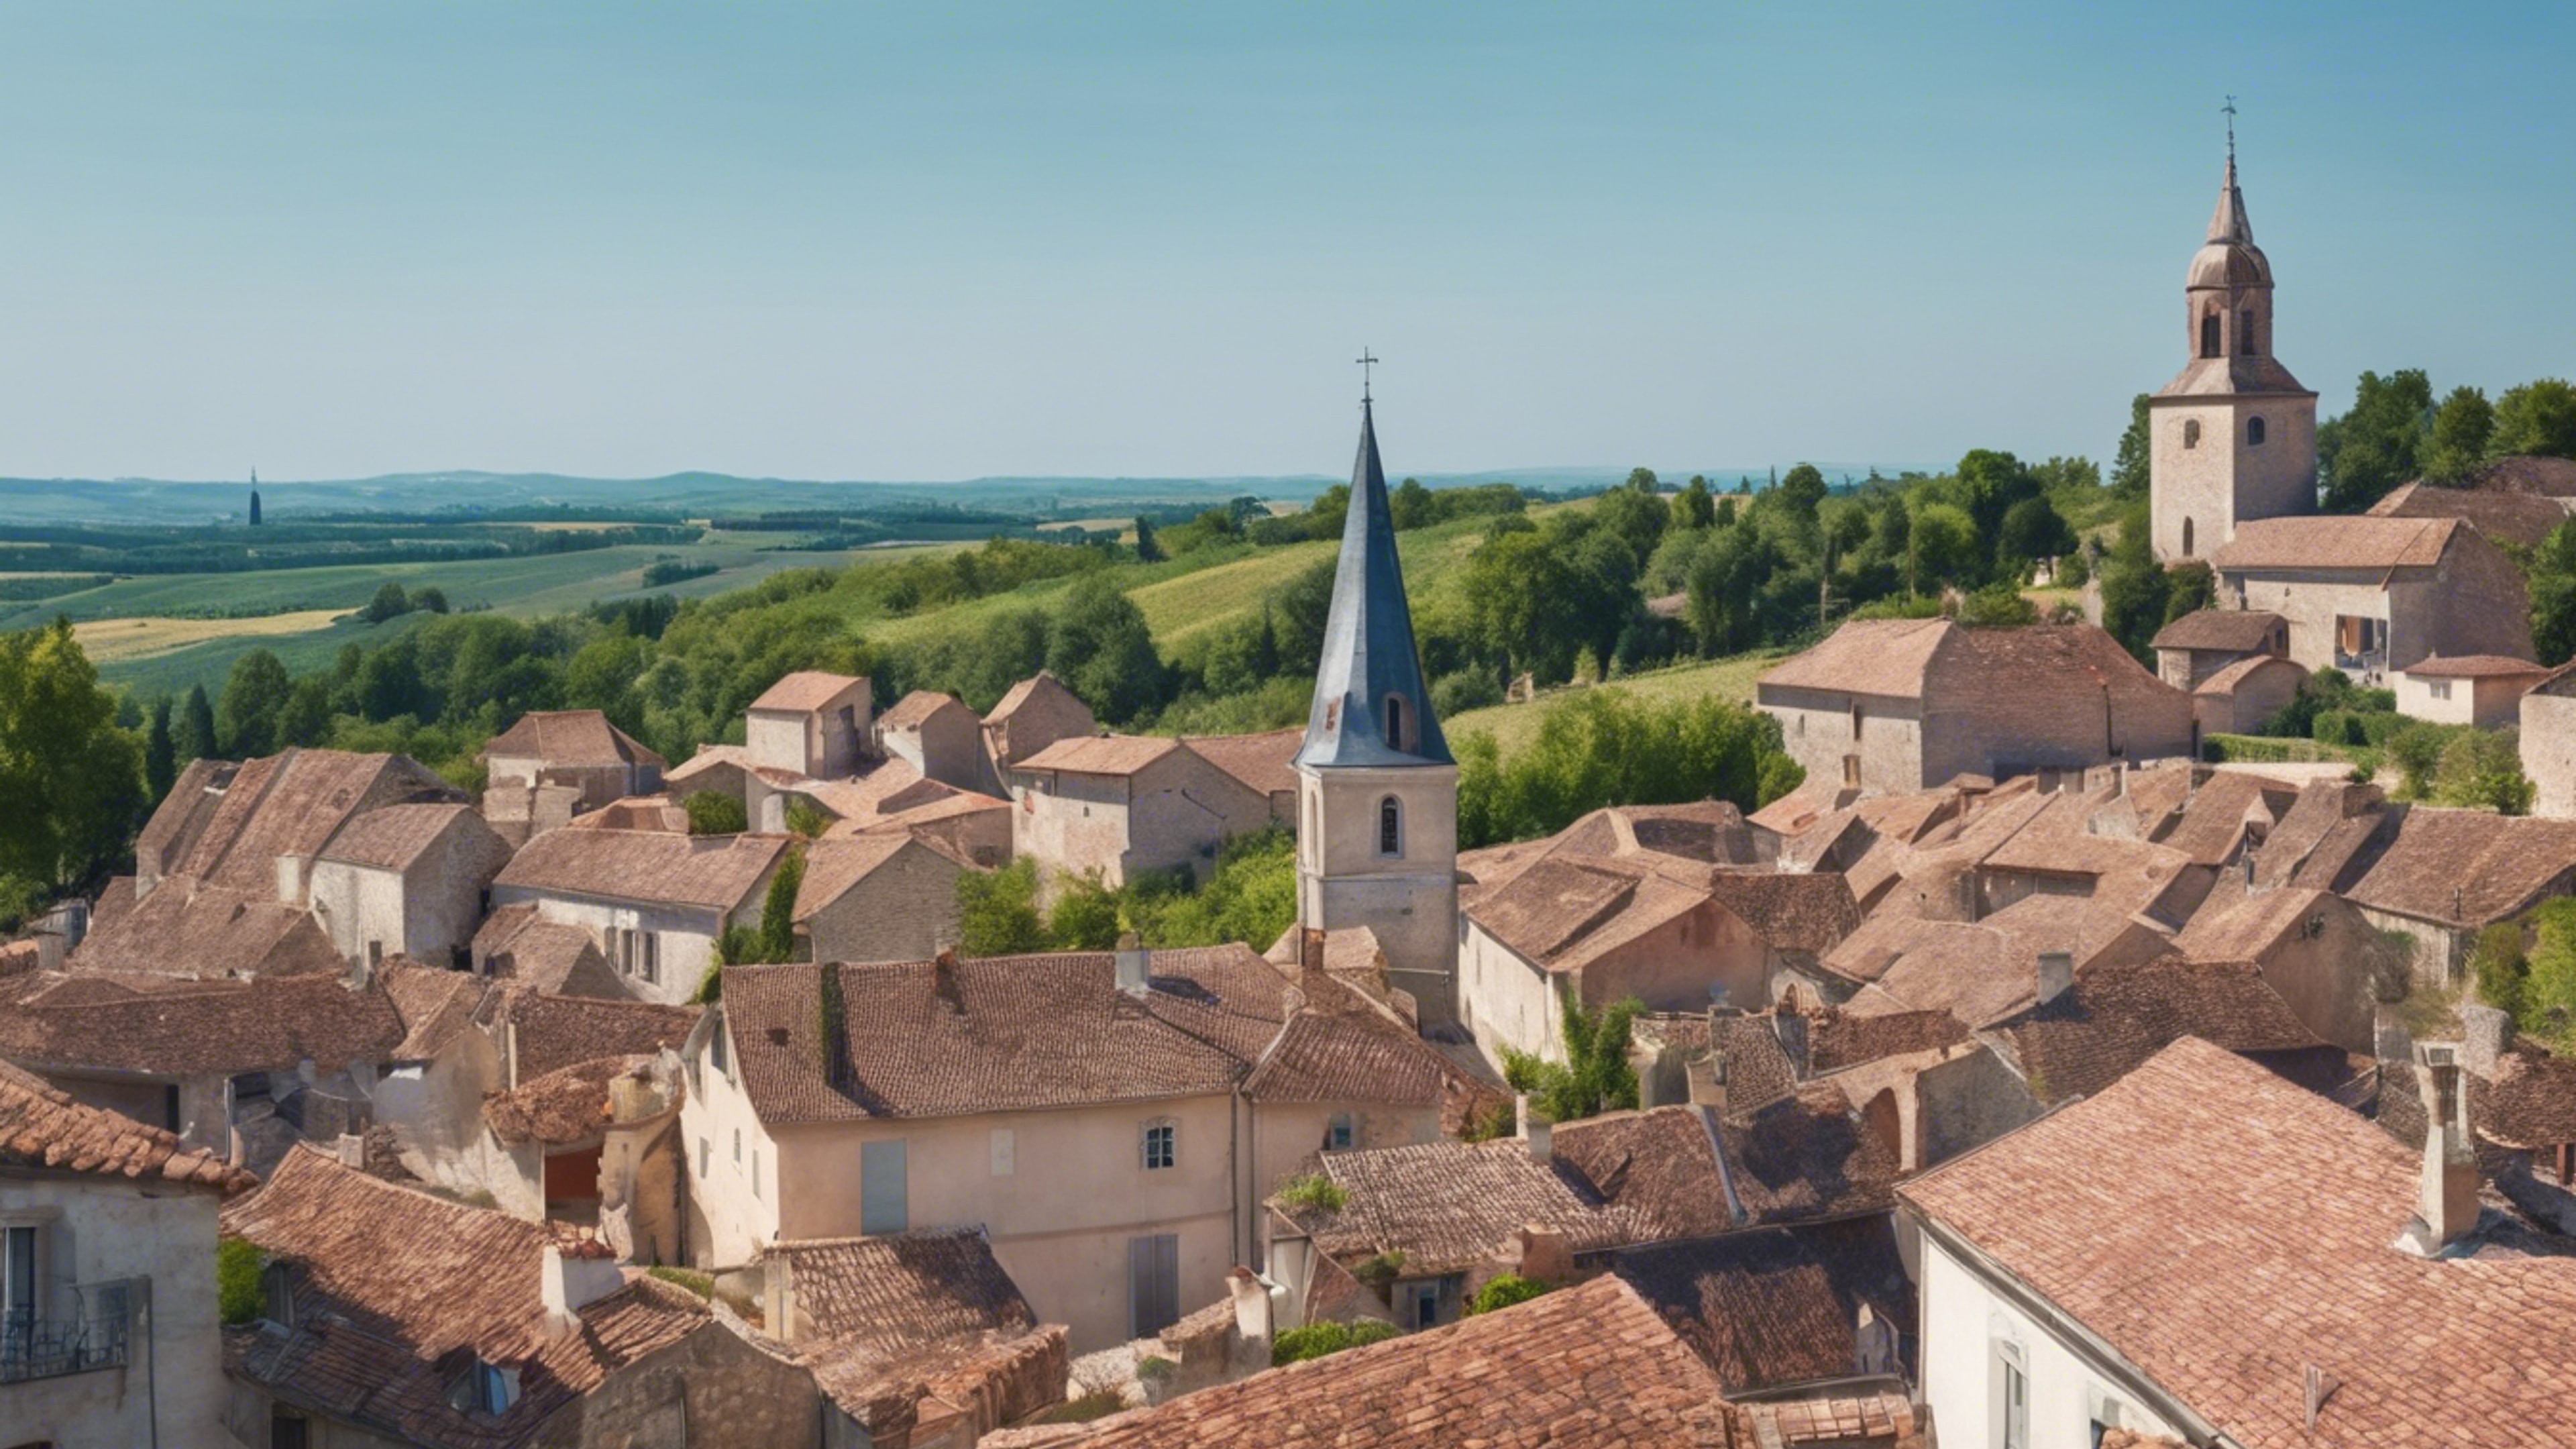 A panoramic view of a French country village with red-tiled roofs, a church spire, and surrounding vineyards under a clear blue sky. Fond d'écran[29c4a00e876546cab0f2]